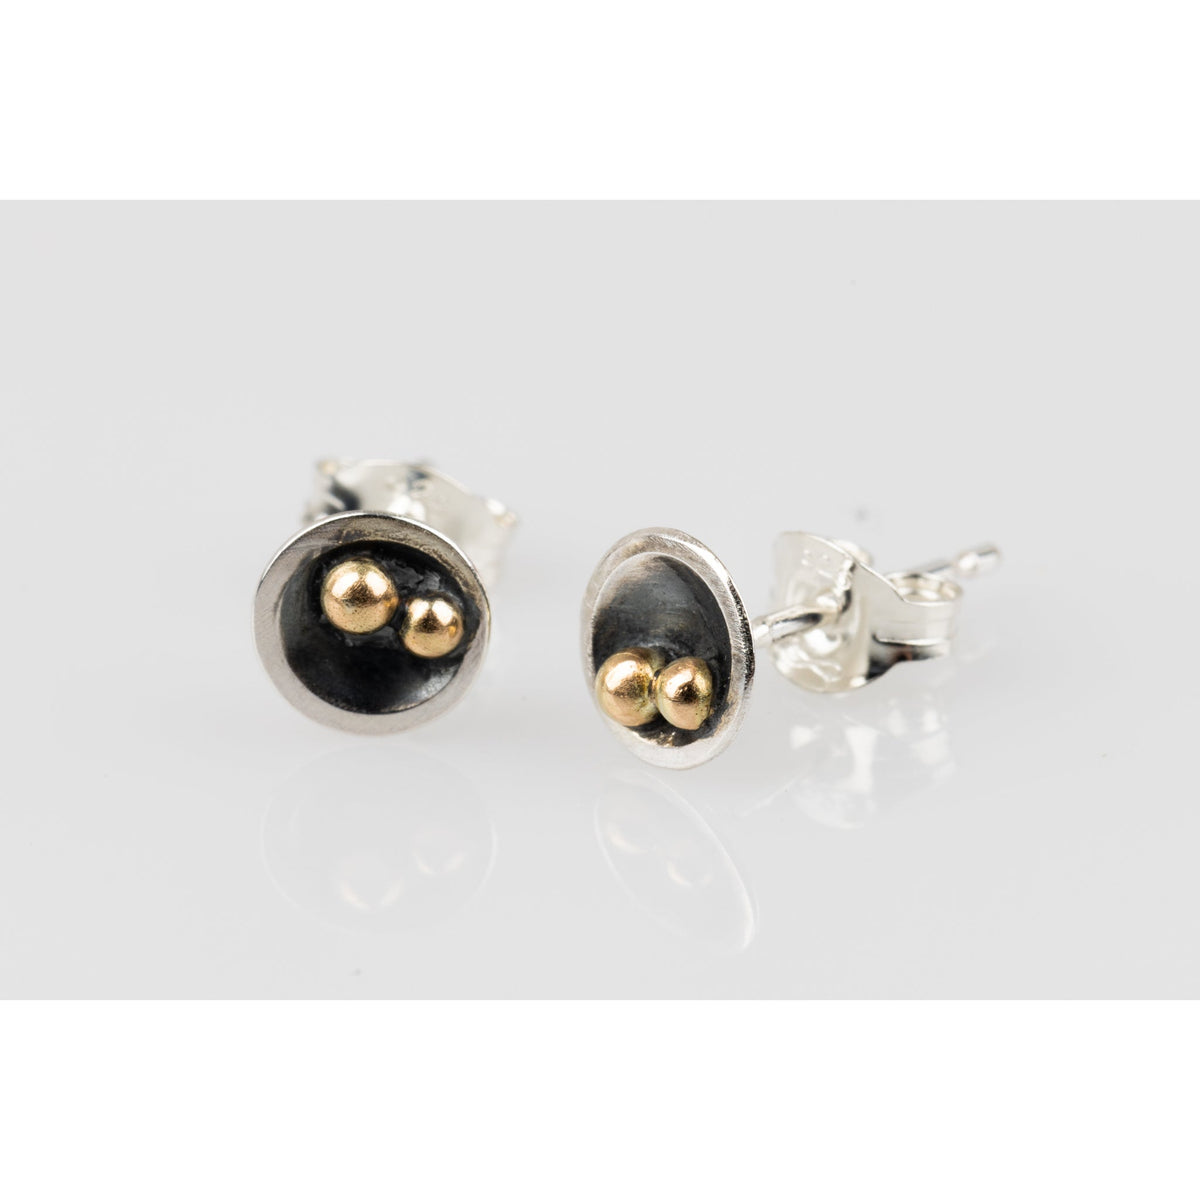 &#39;SA Ea46 Domed oxidised studs&#39; by Sandra Austin jewellery, available at Padstow Gallery, Cornwall